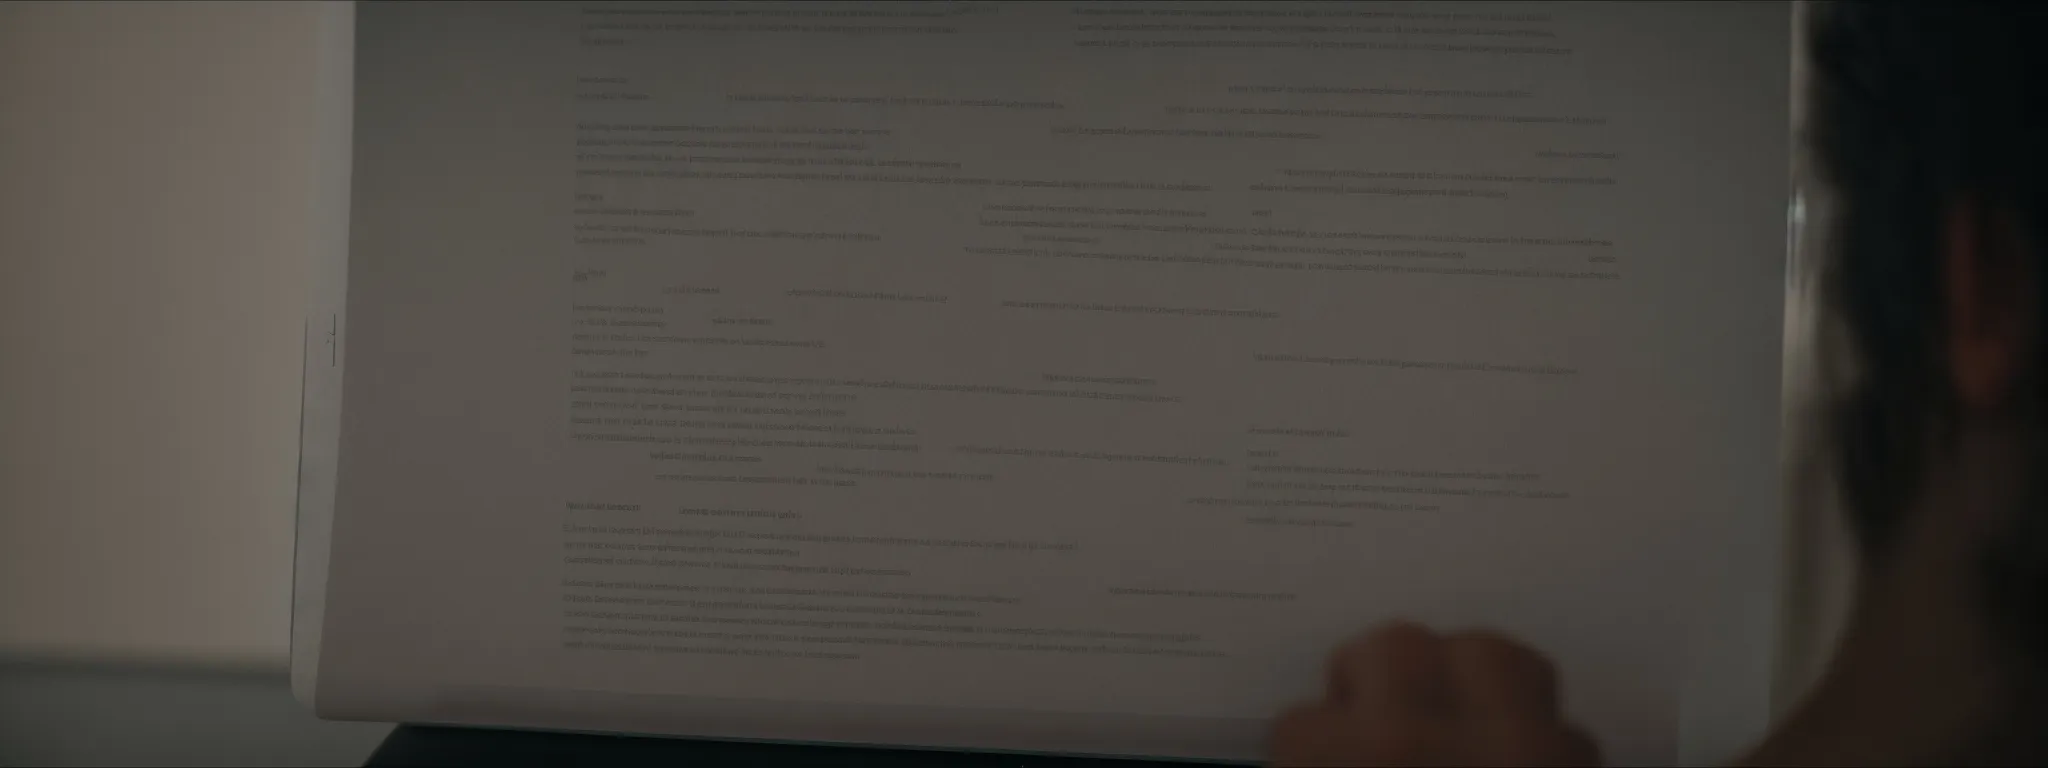 a person reading an organized, clearly sectioned document on a computer screen.